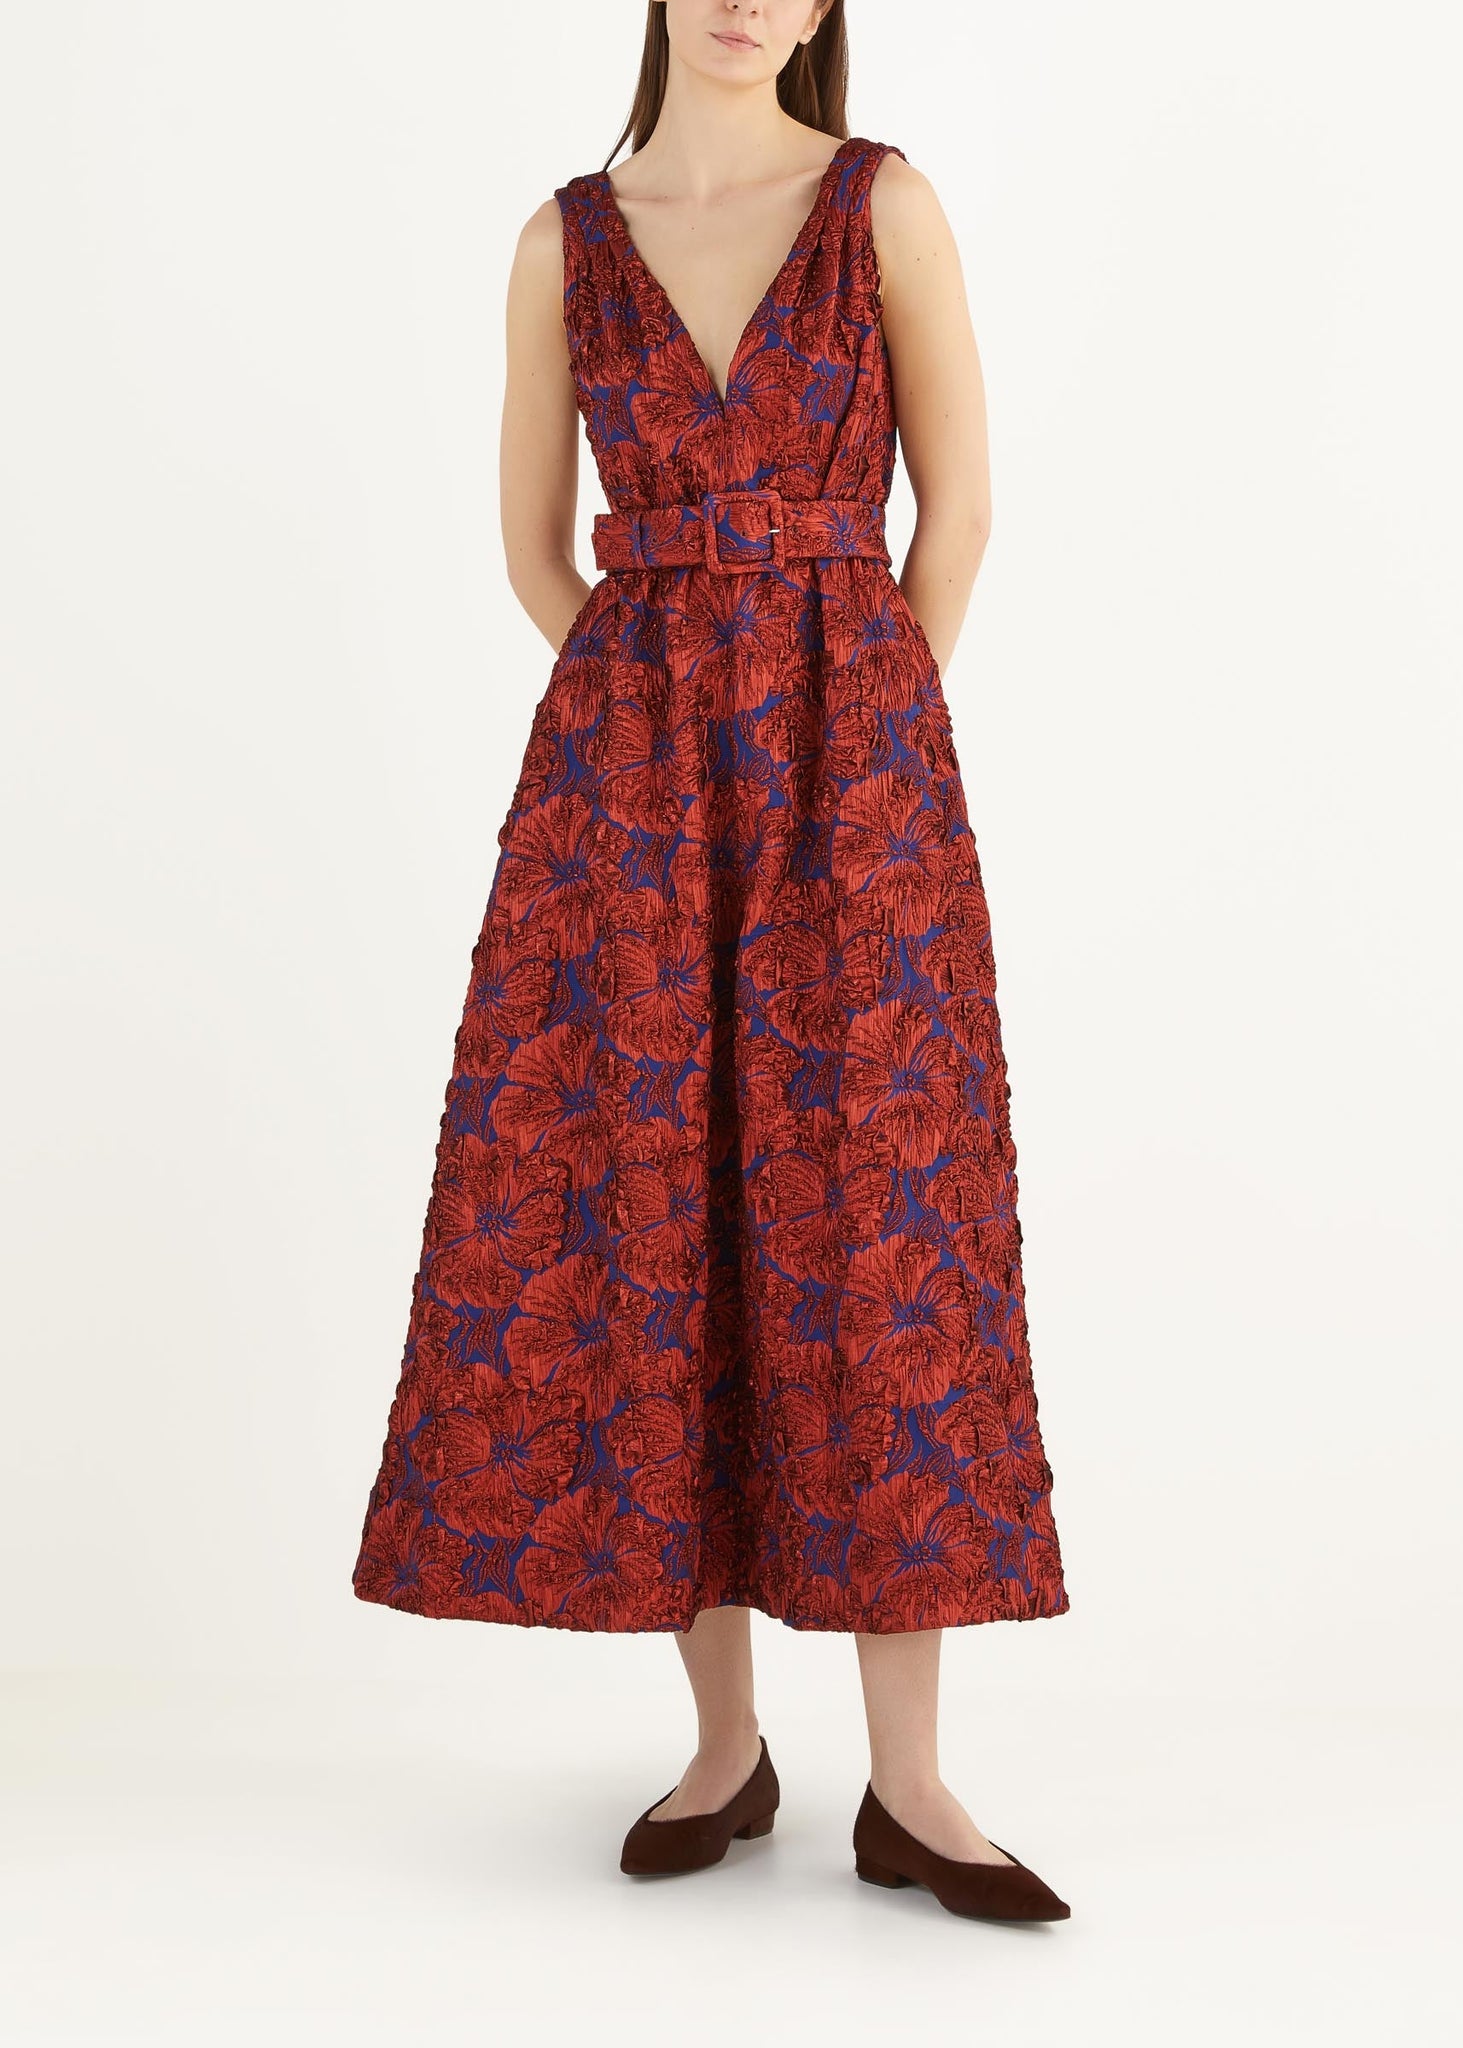 NORMA DRESS in RED FLORAL JACQUARD